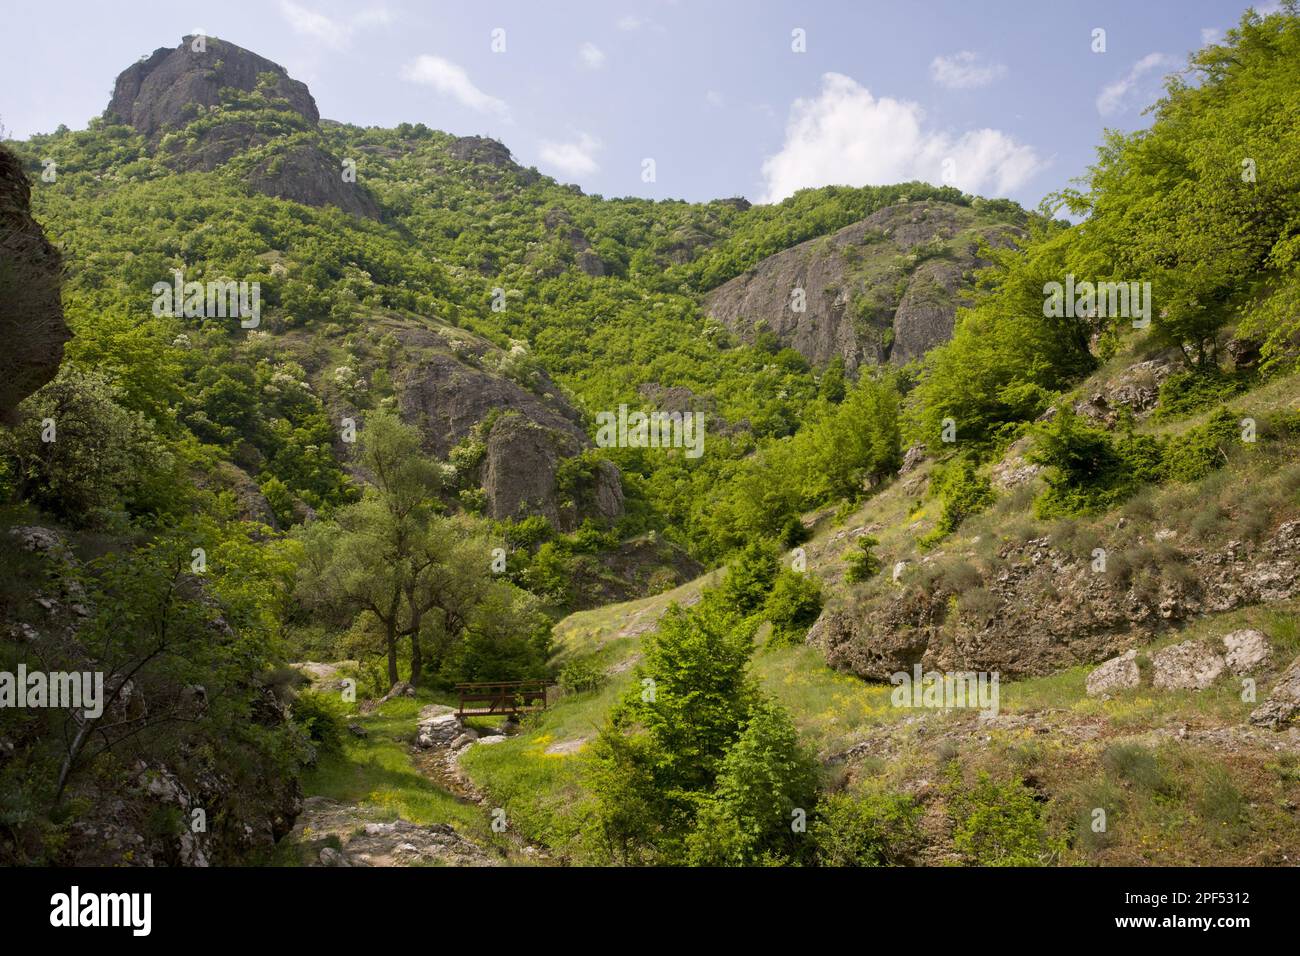 View of a botanically rich protected area with Oriental oriental hornbeam (Carpinus orientalis) and manna ash (Fraxinus ornus) growing on volcanic Stock Photo